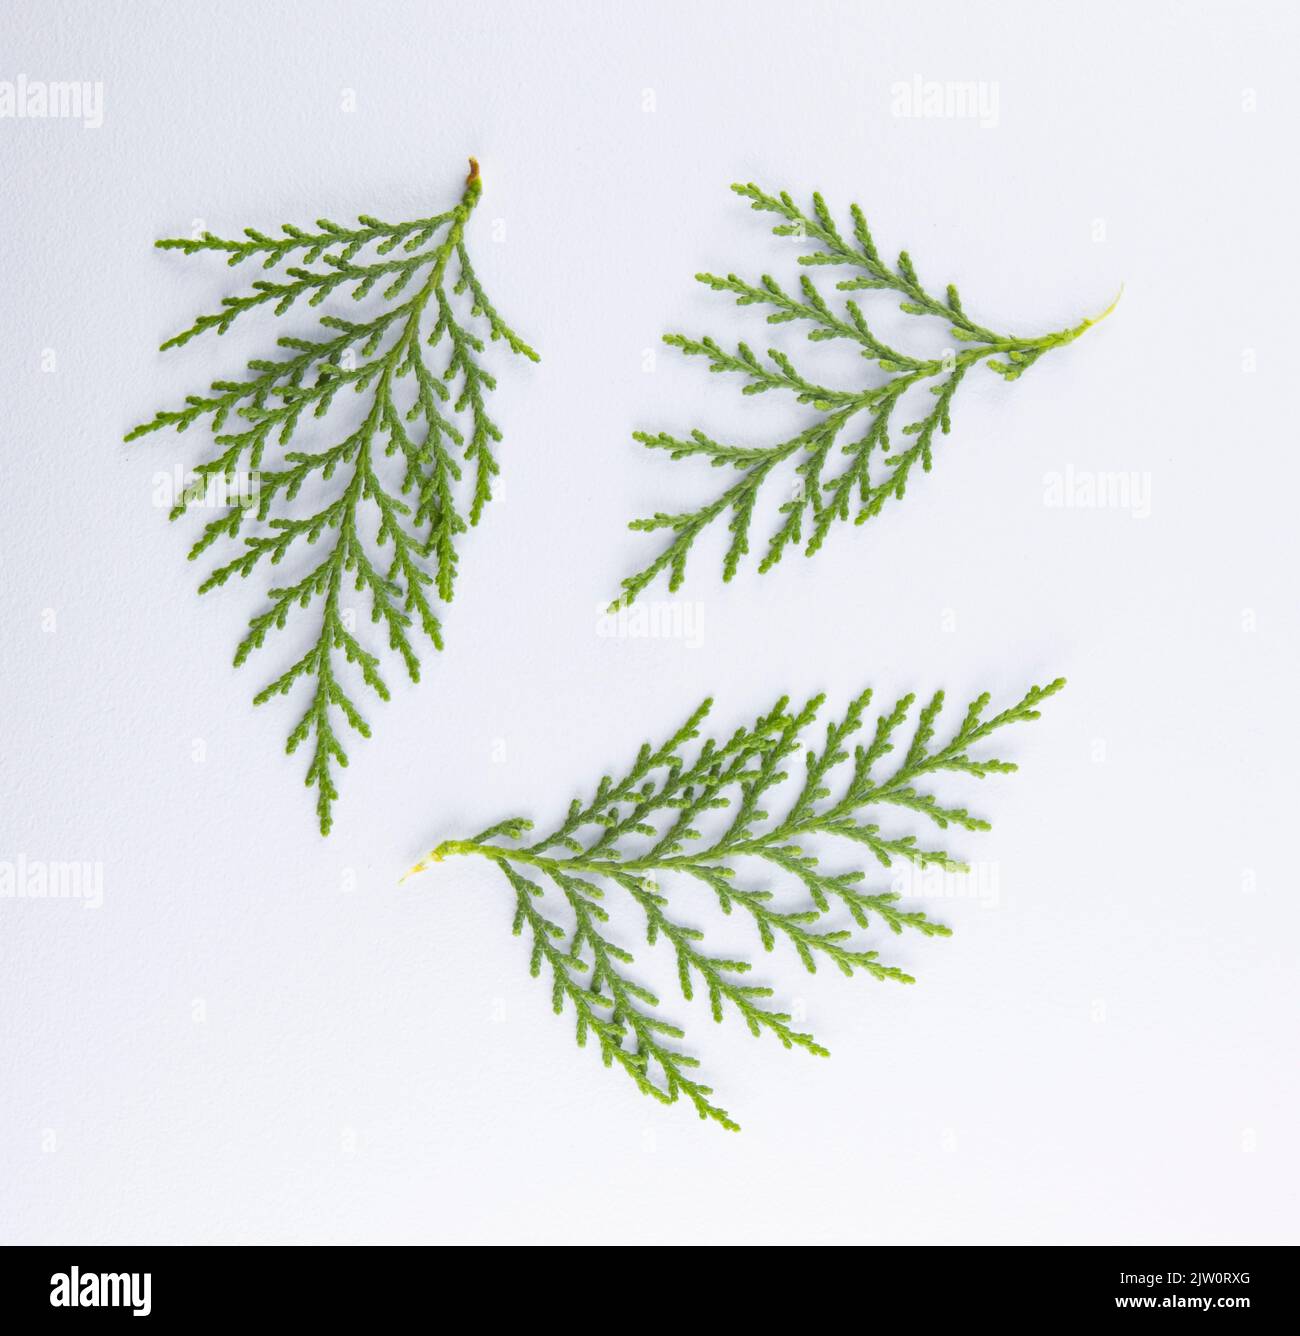 Branch of green thuja, collection thuja  with 3 piece on a white background Stock Photo